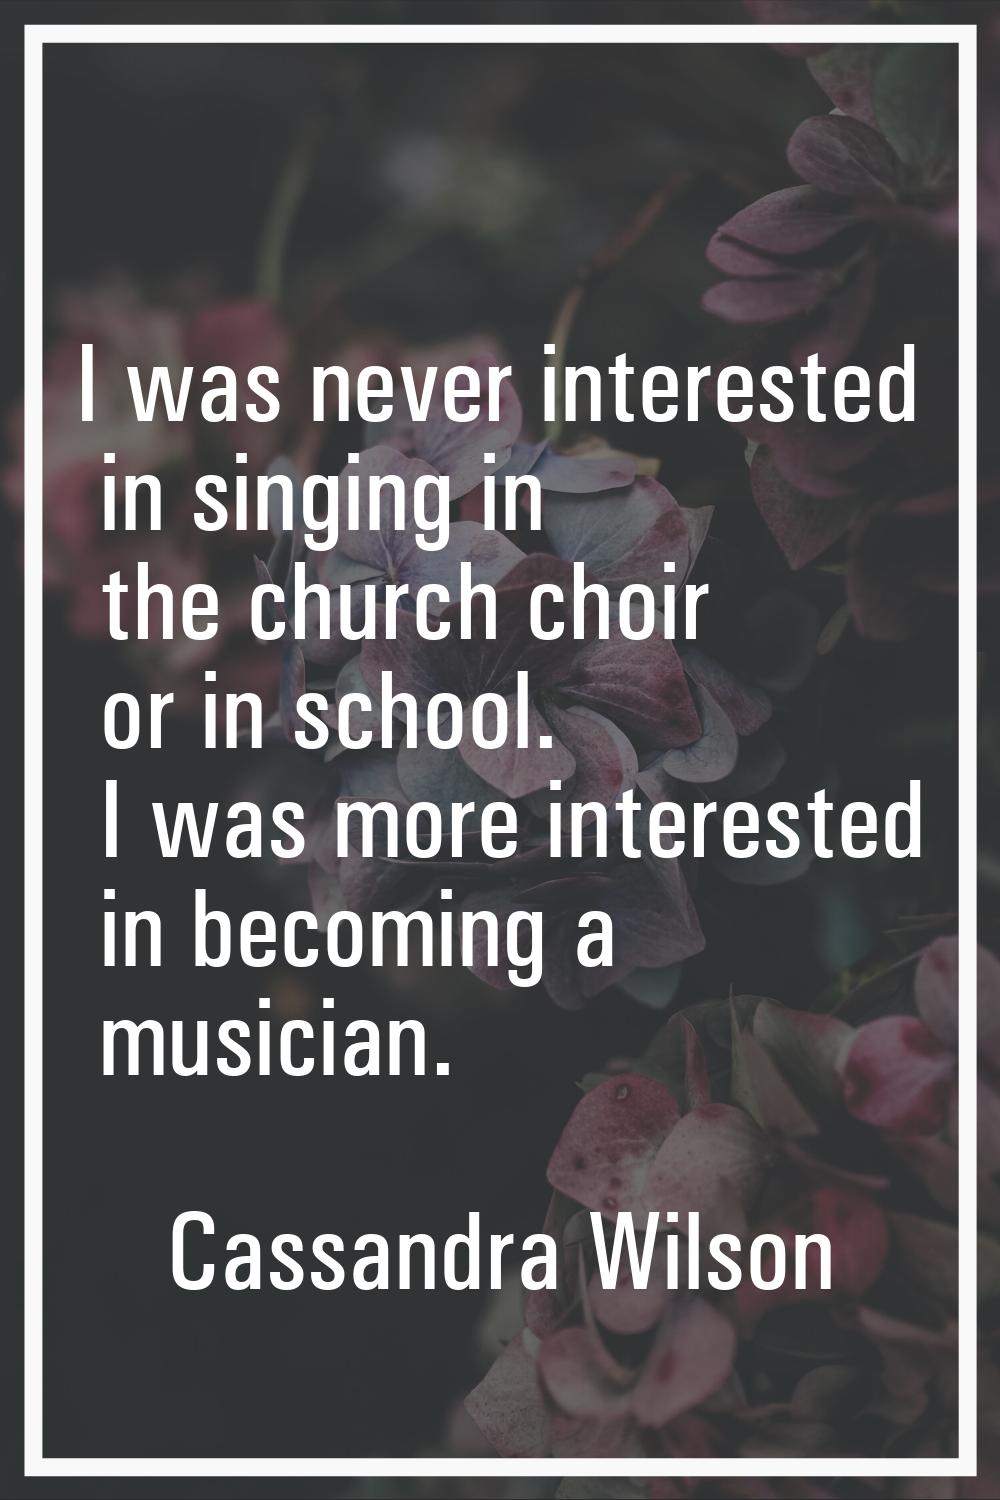 I was never interested in singing in the church choir or in school. I was more interested in becomi